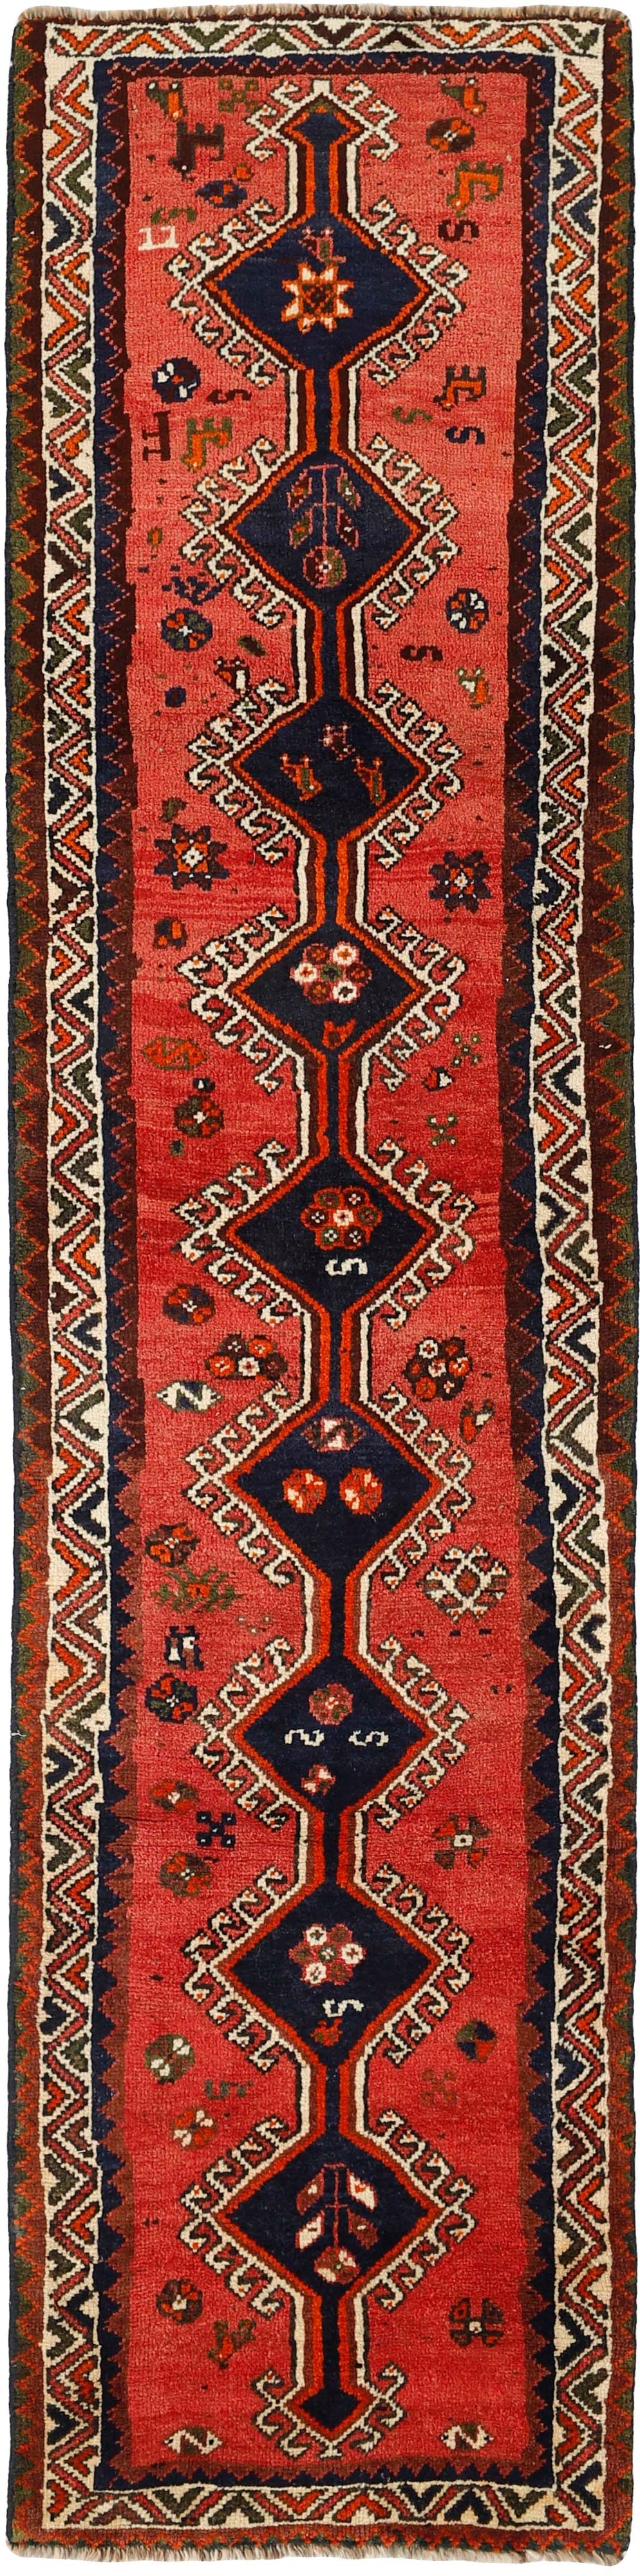 Authentic persian runner with a traditional tribal geometric pattern in red, black and grey